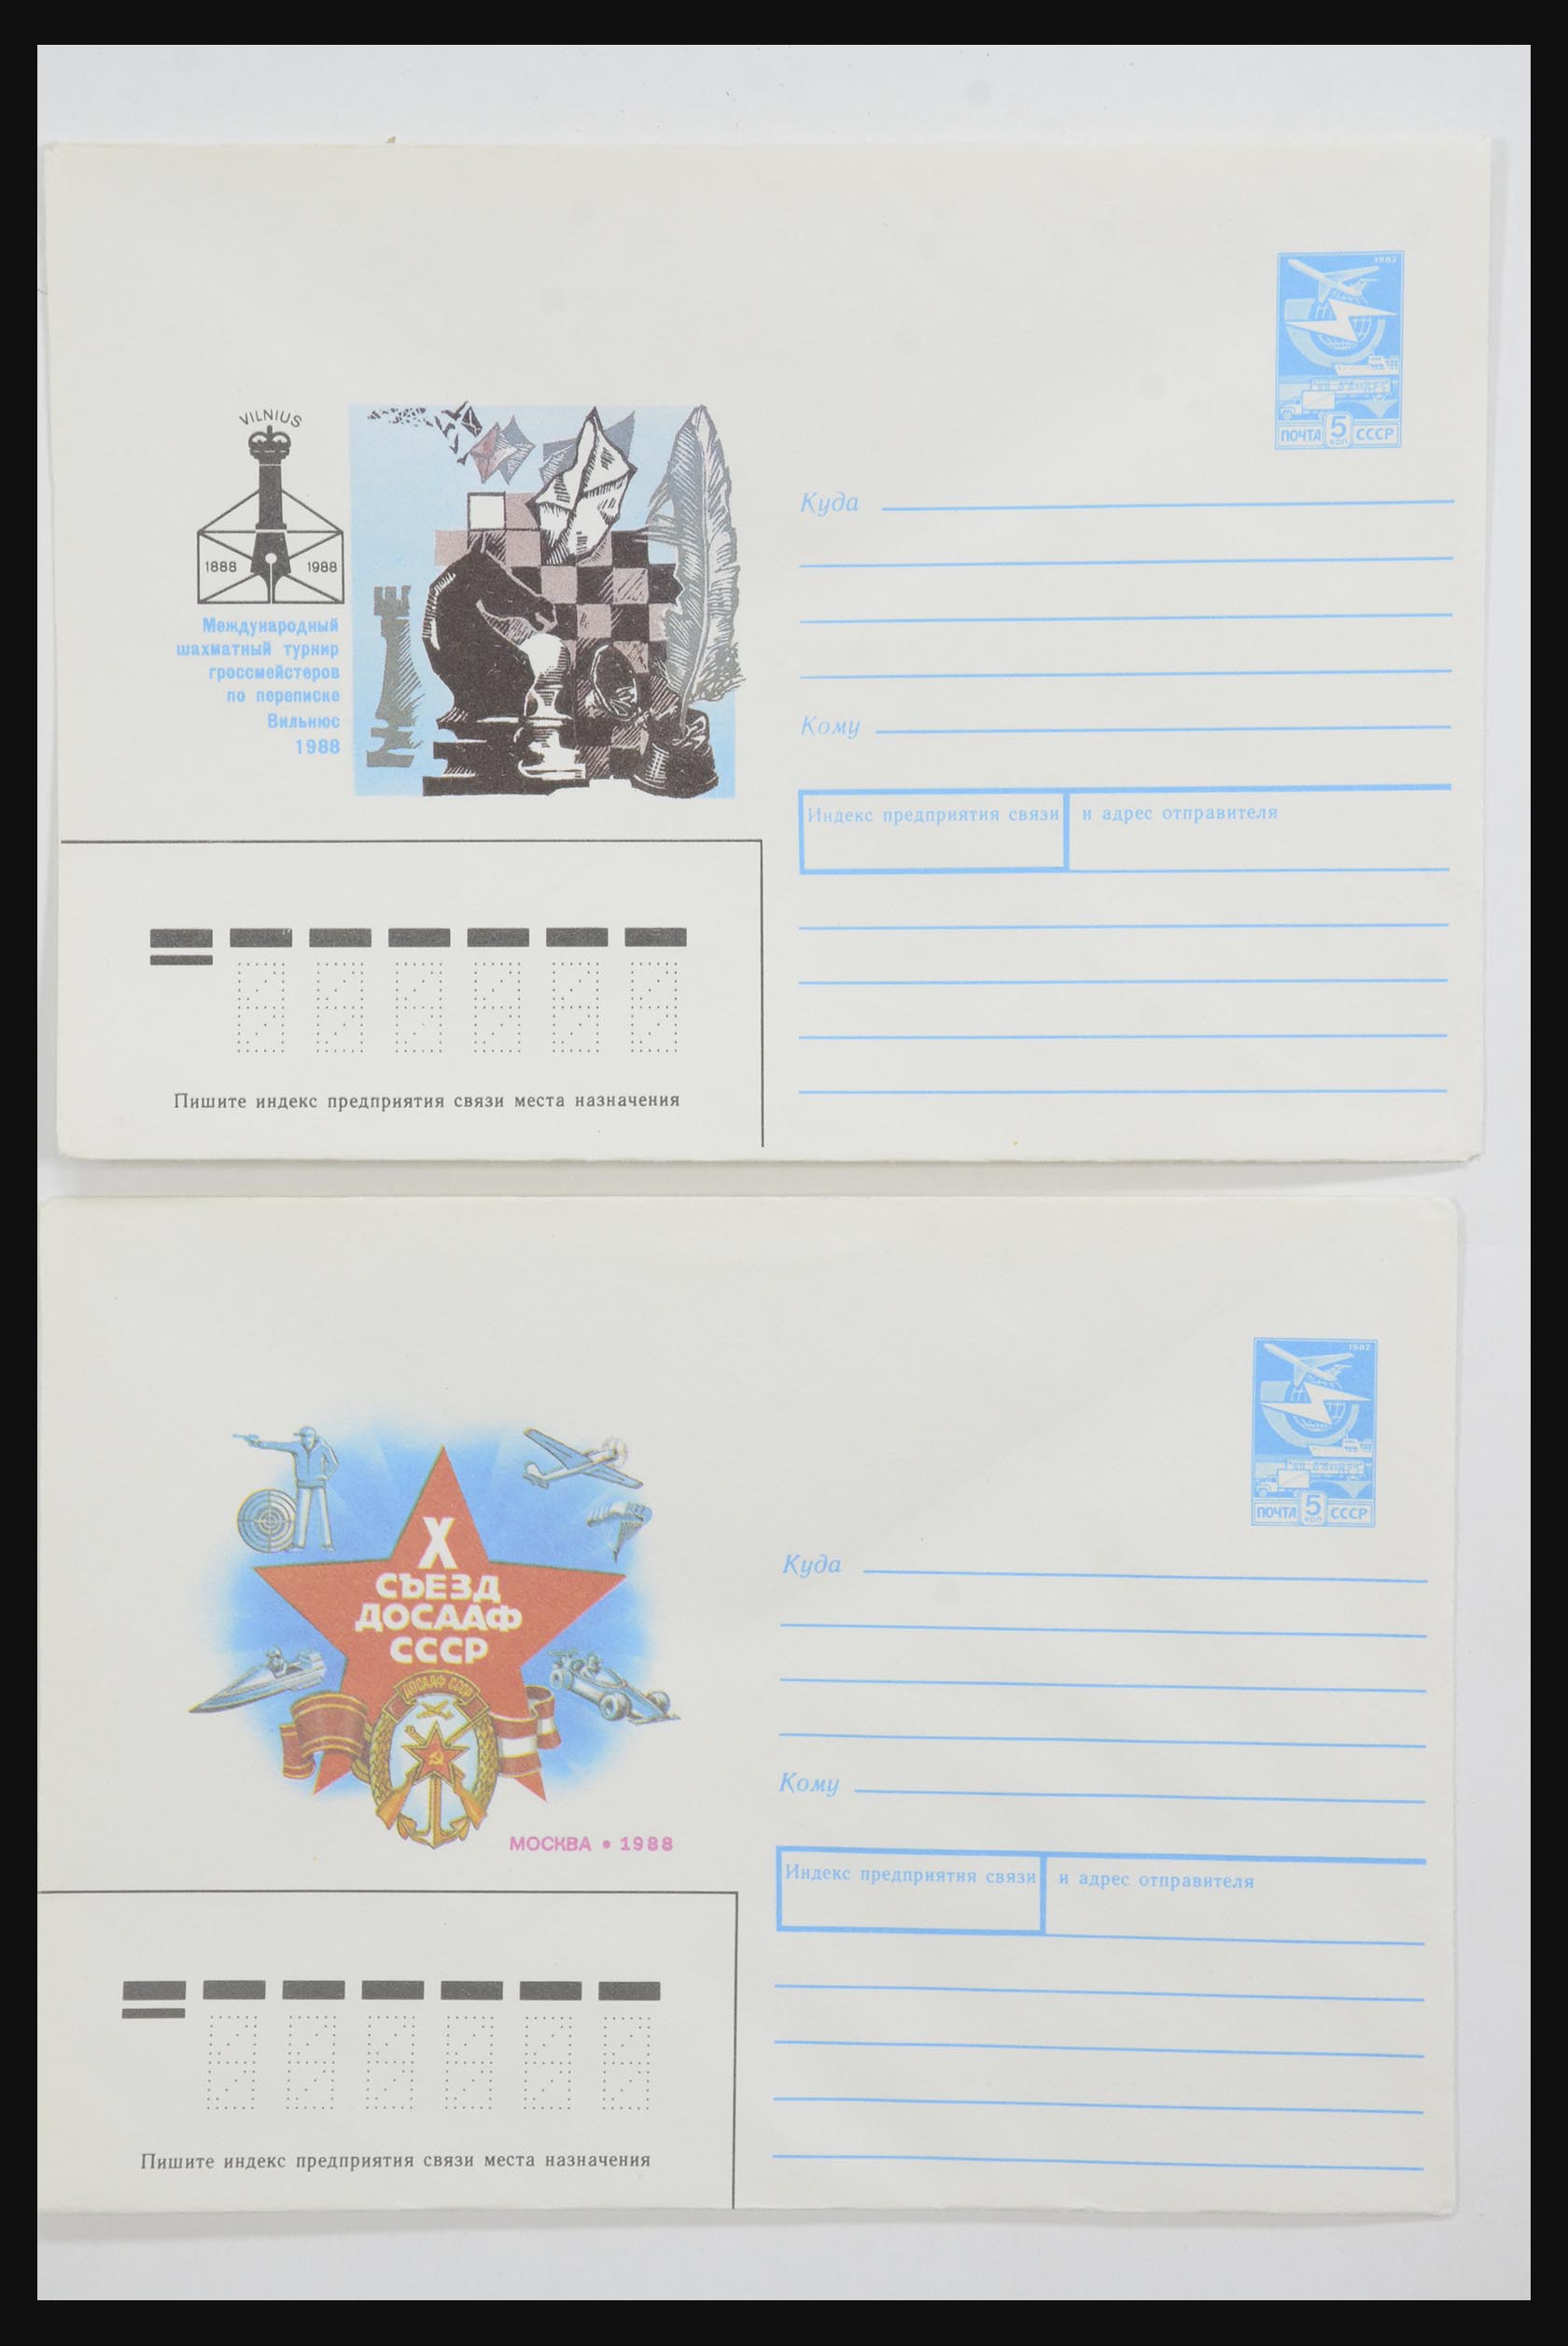 31928 0043 - 31928 Eastern Europe covers 1960's-1990's.